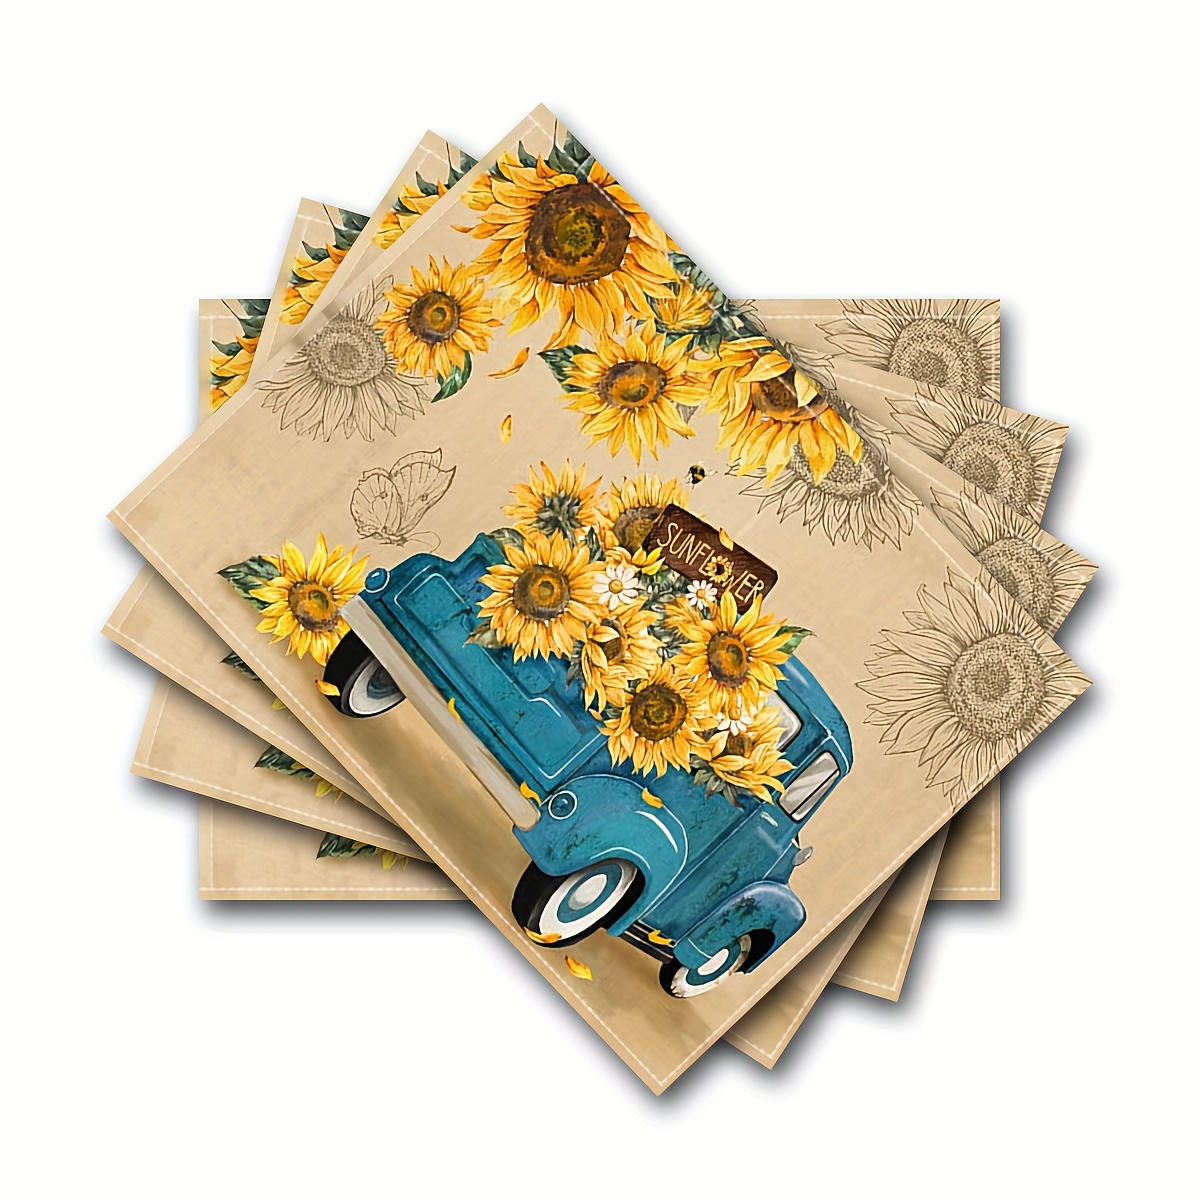 

4pcs, Table Pads, Sunflower Vintage Truck Design Placemats Set, Rustic Burlap Dining Table Mats, Retro Style Festive Linen Place Mats For Kitchen Table Decor & Indoor Dining